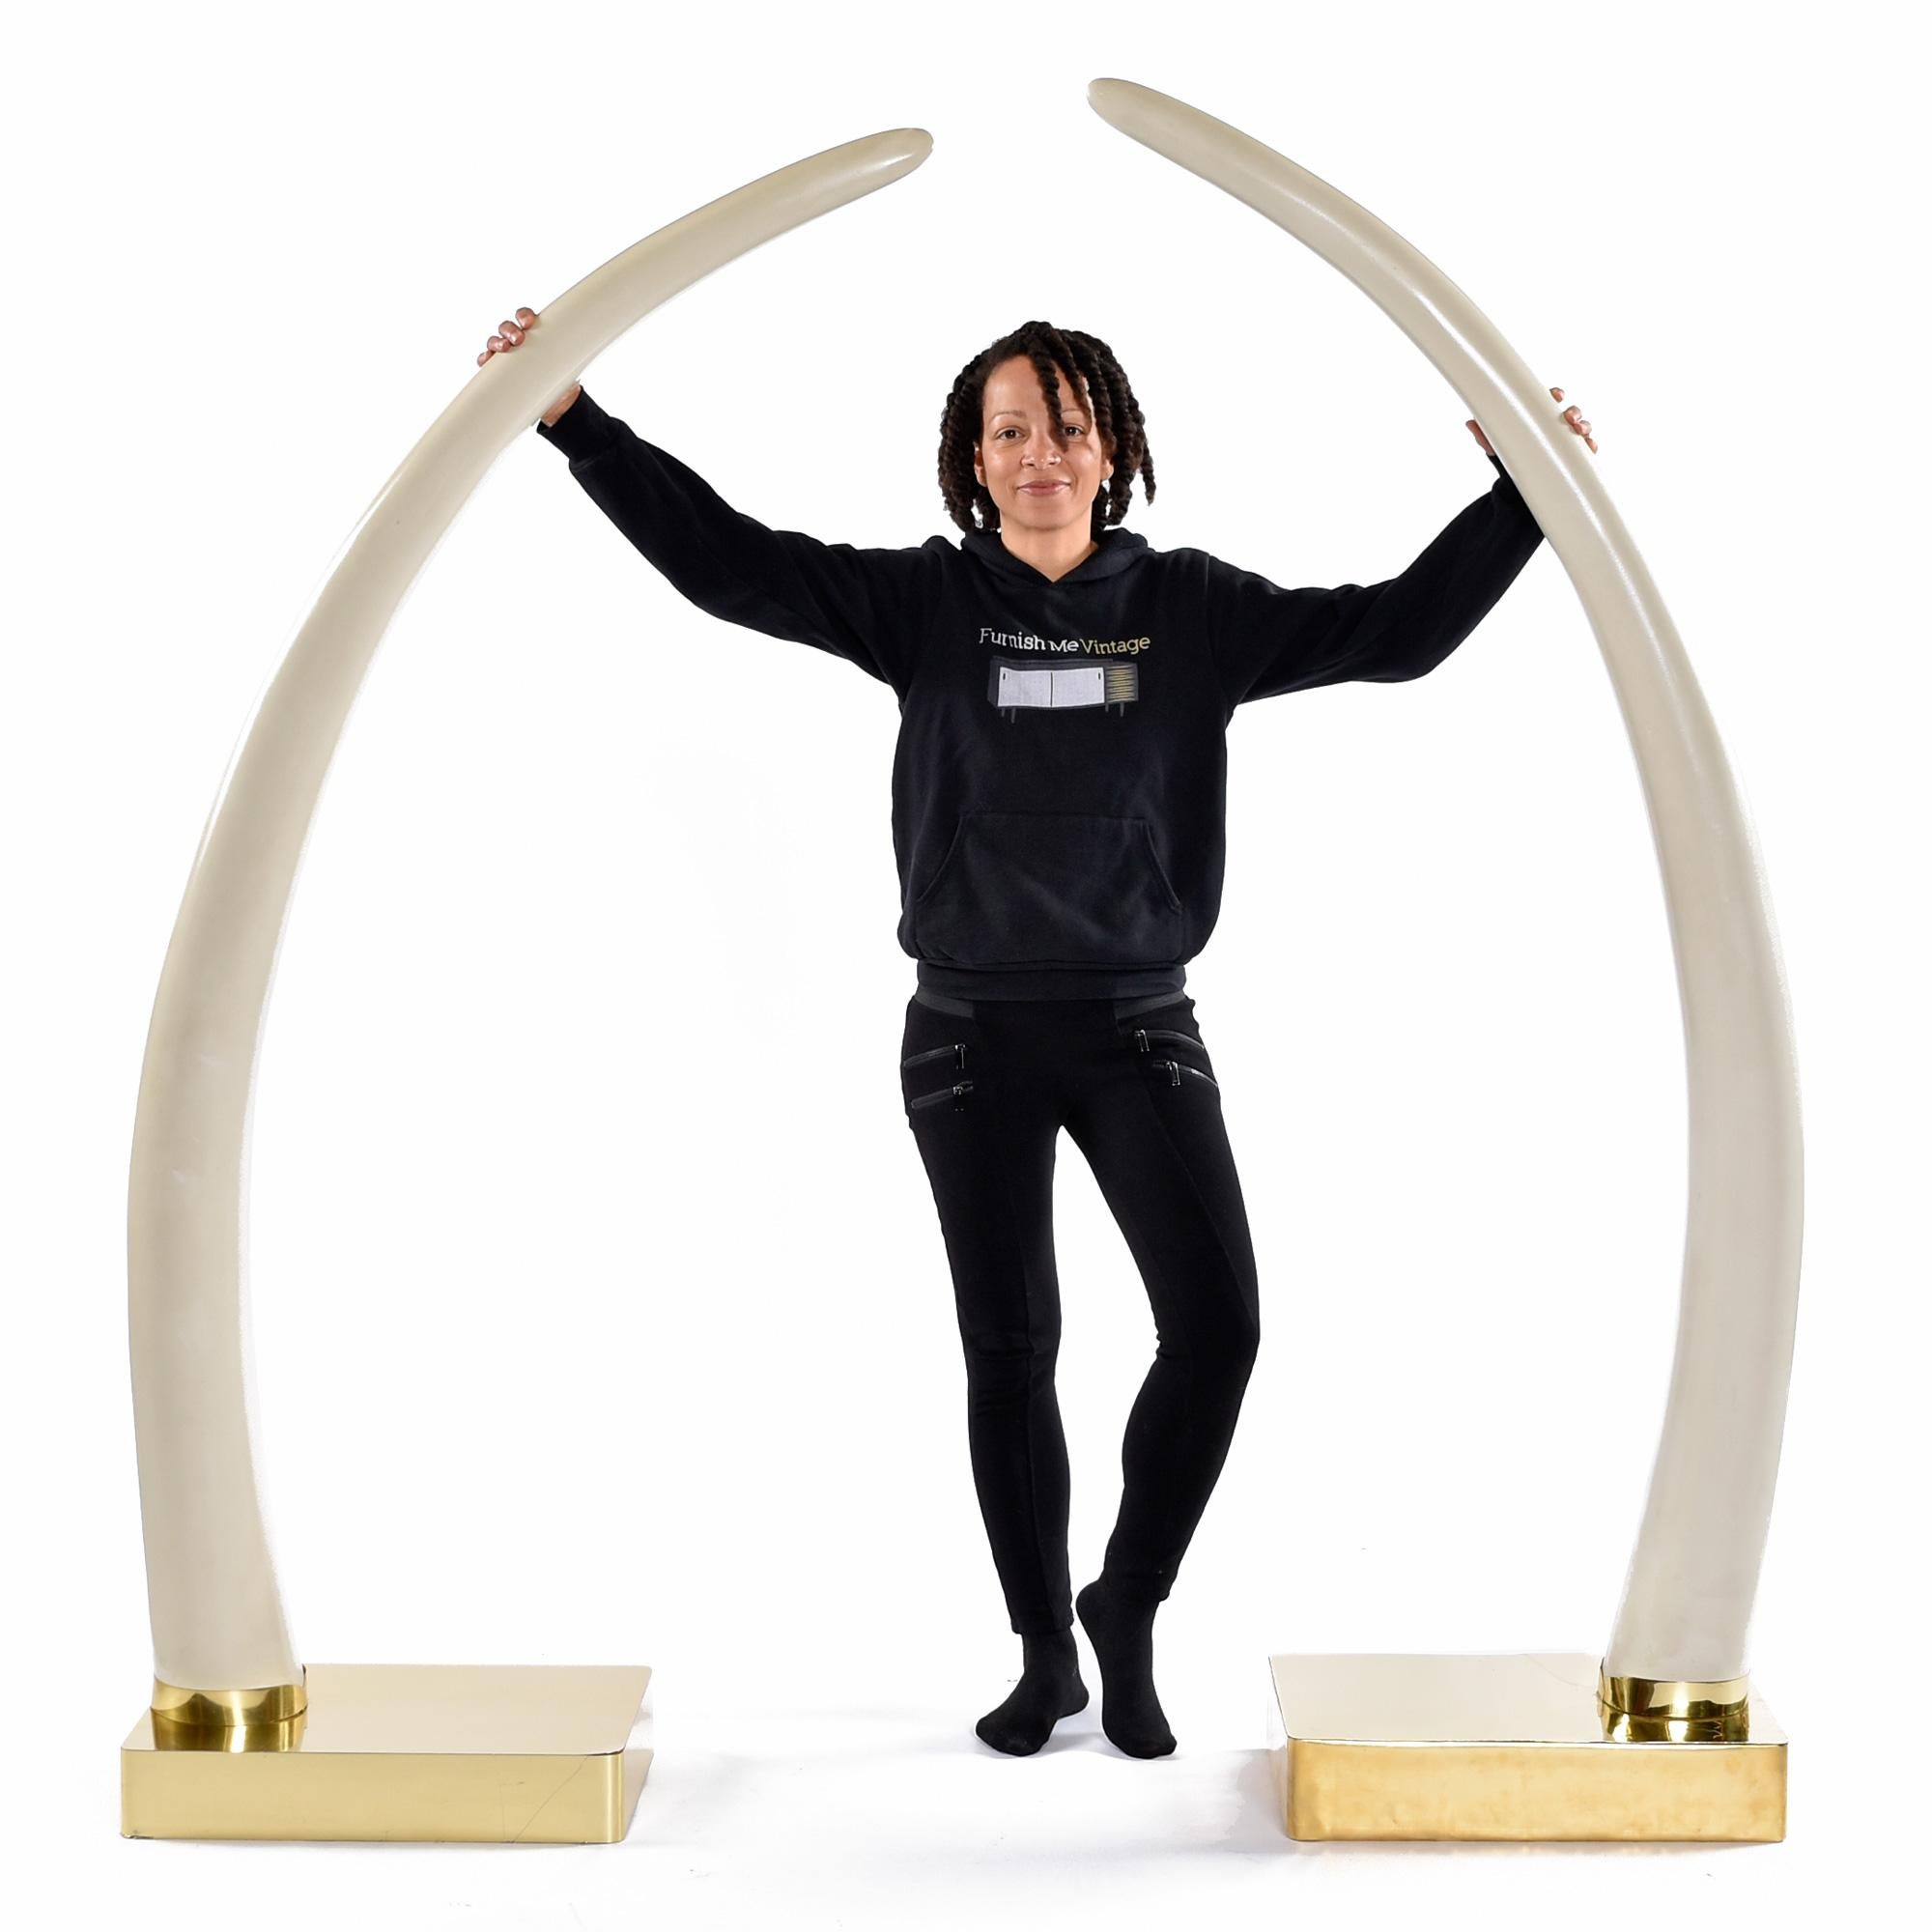 Massive faux-ivory elephant tusks on polished brass bases.  Flank your executive desk with these magnificent show pieces and make a statement.  Ideal for intimidating your business associates during negotiations.  These tusks will look incredible no